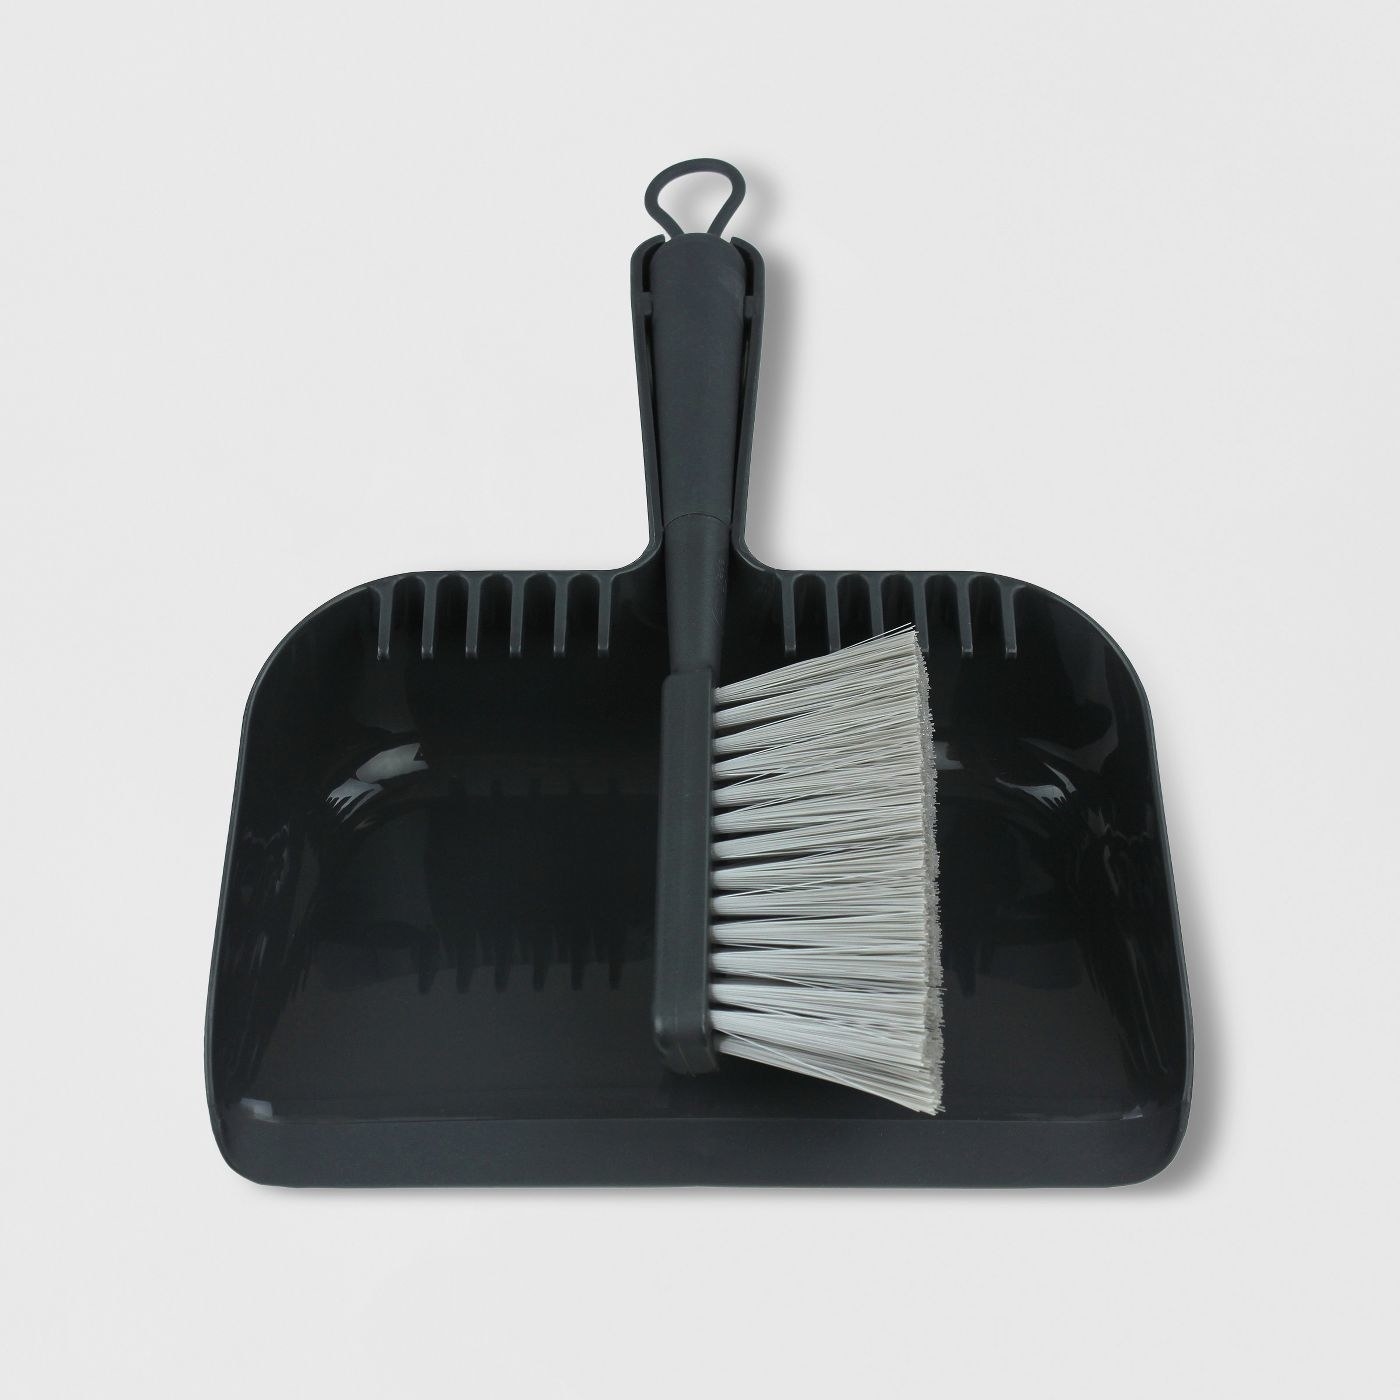 the black hand broom and dustpan